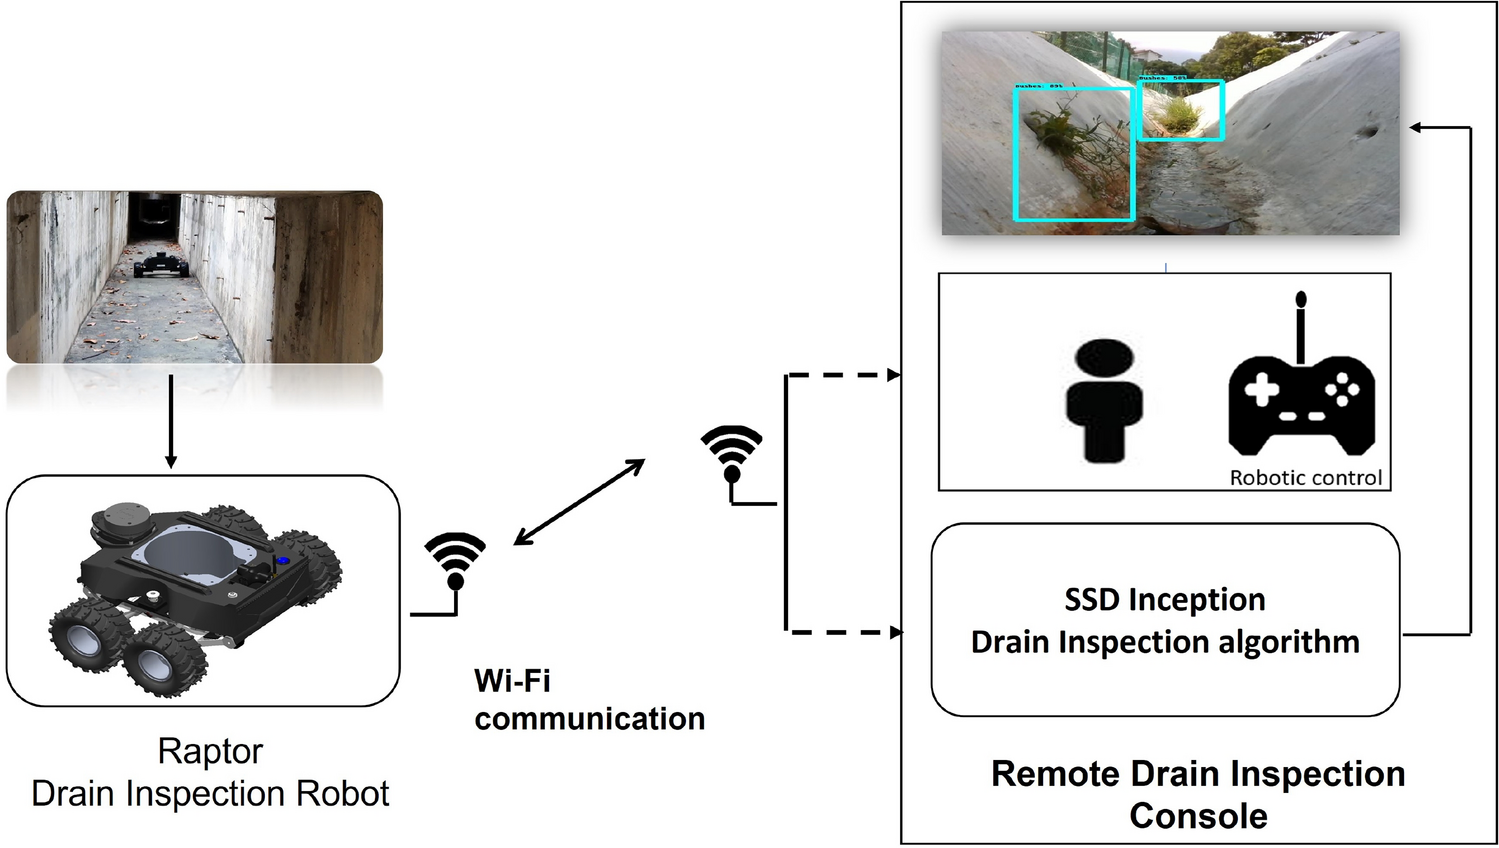 Remote drain inspection framework using the convolutional neural network  and re-configurable robot Raptor | Scientific Reports